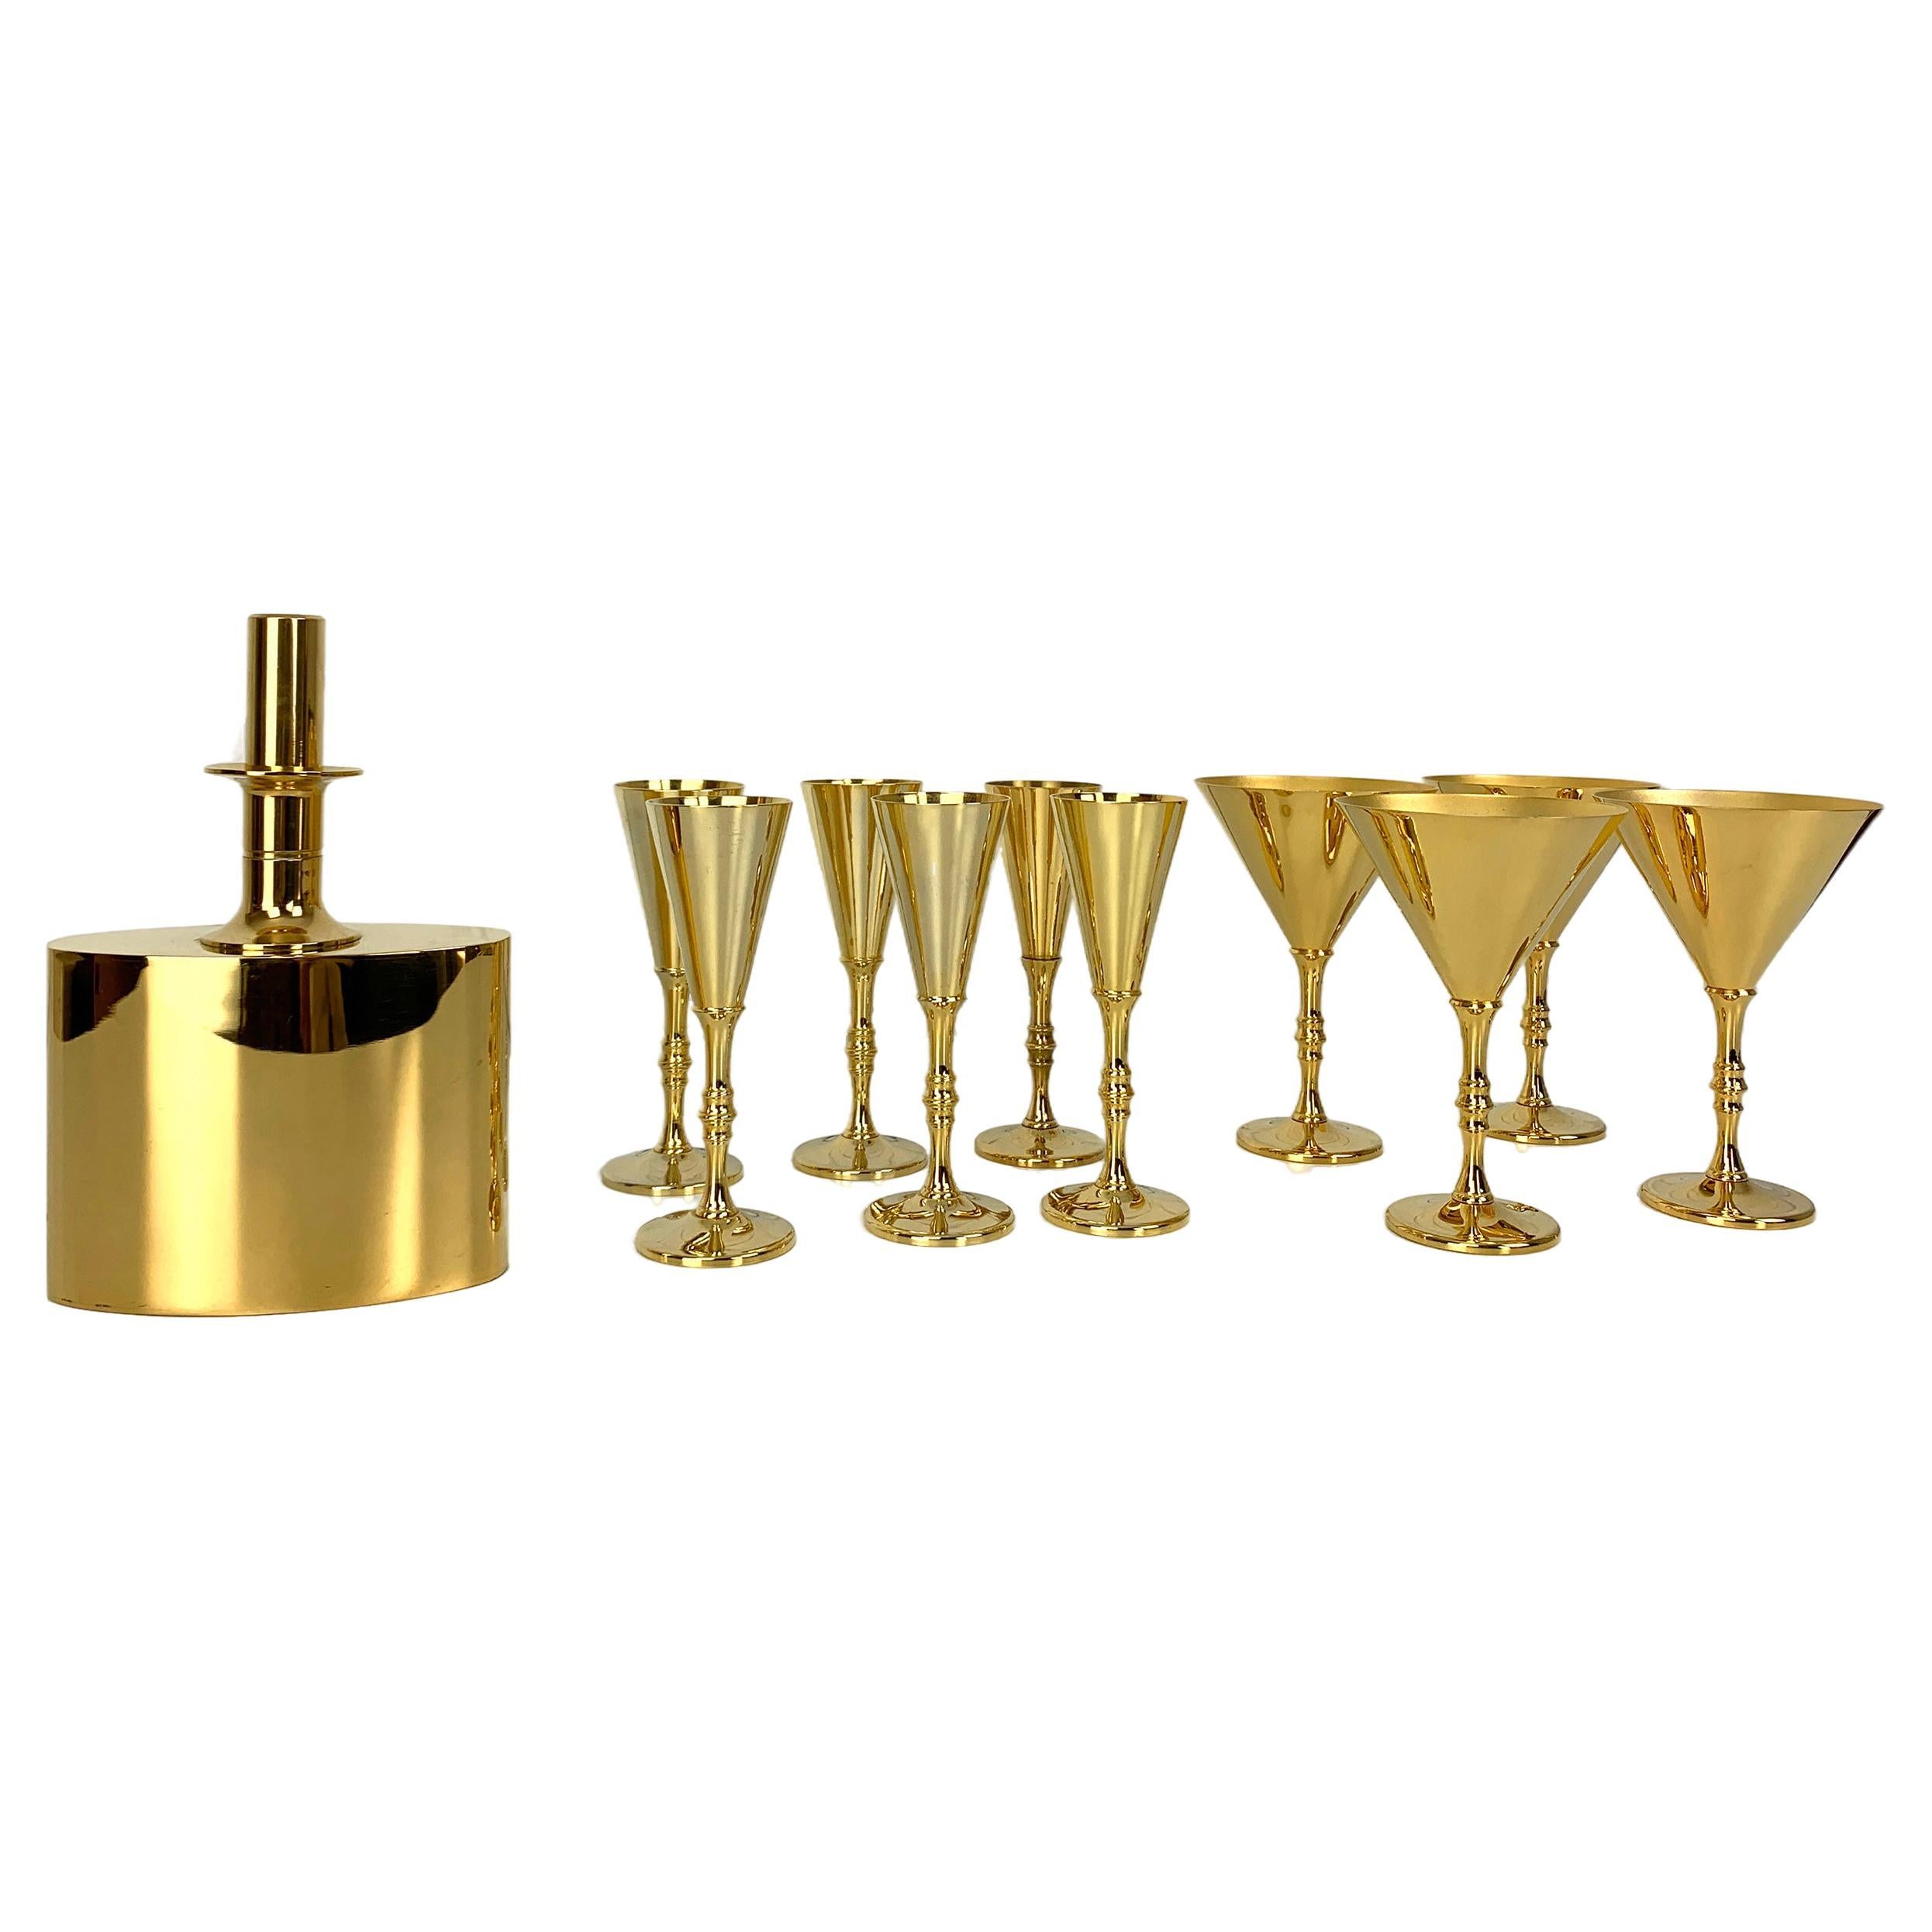 Decanter & 10 glasses in gold plated brass, Pierre Forsell for Skultuna, 1960s